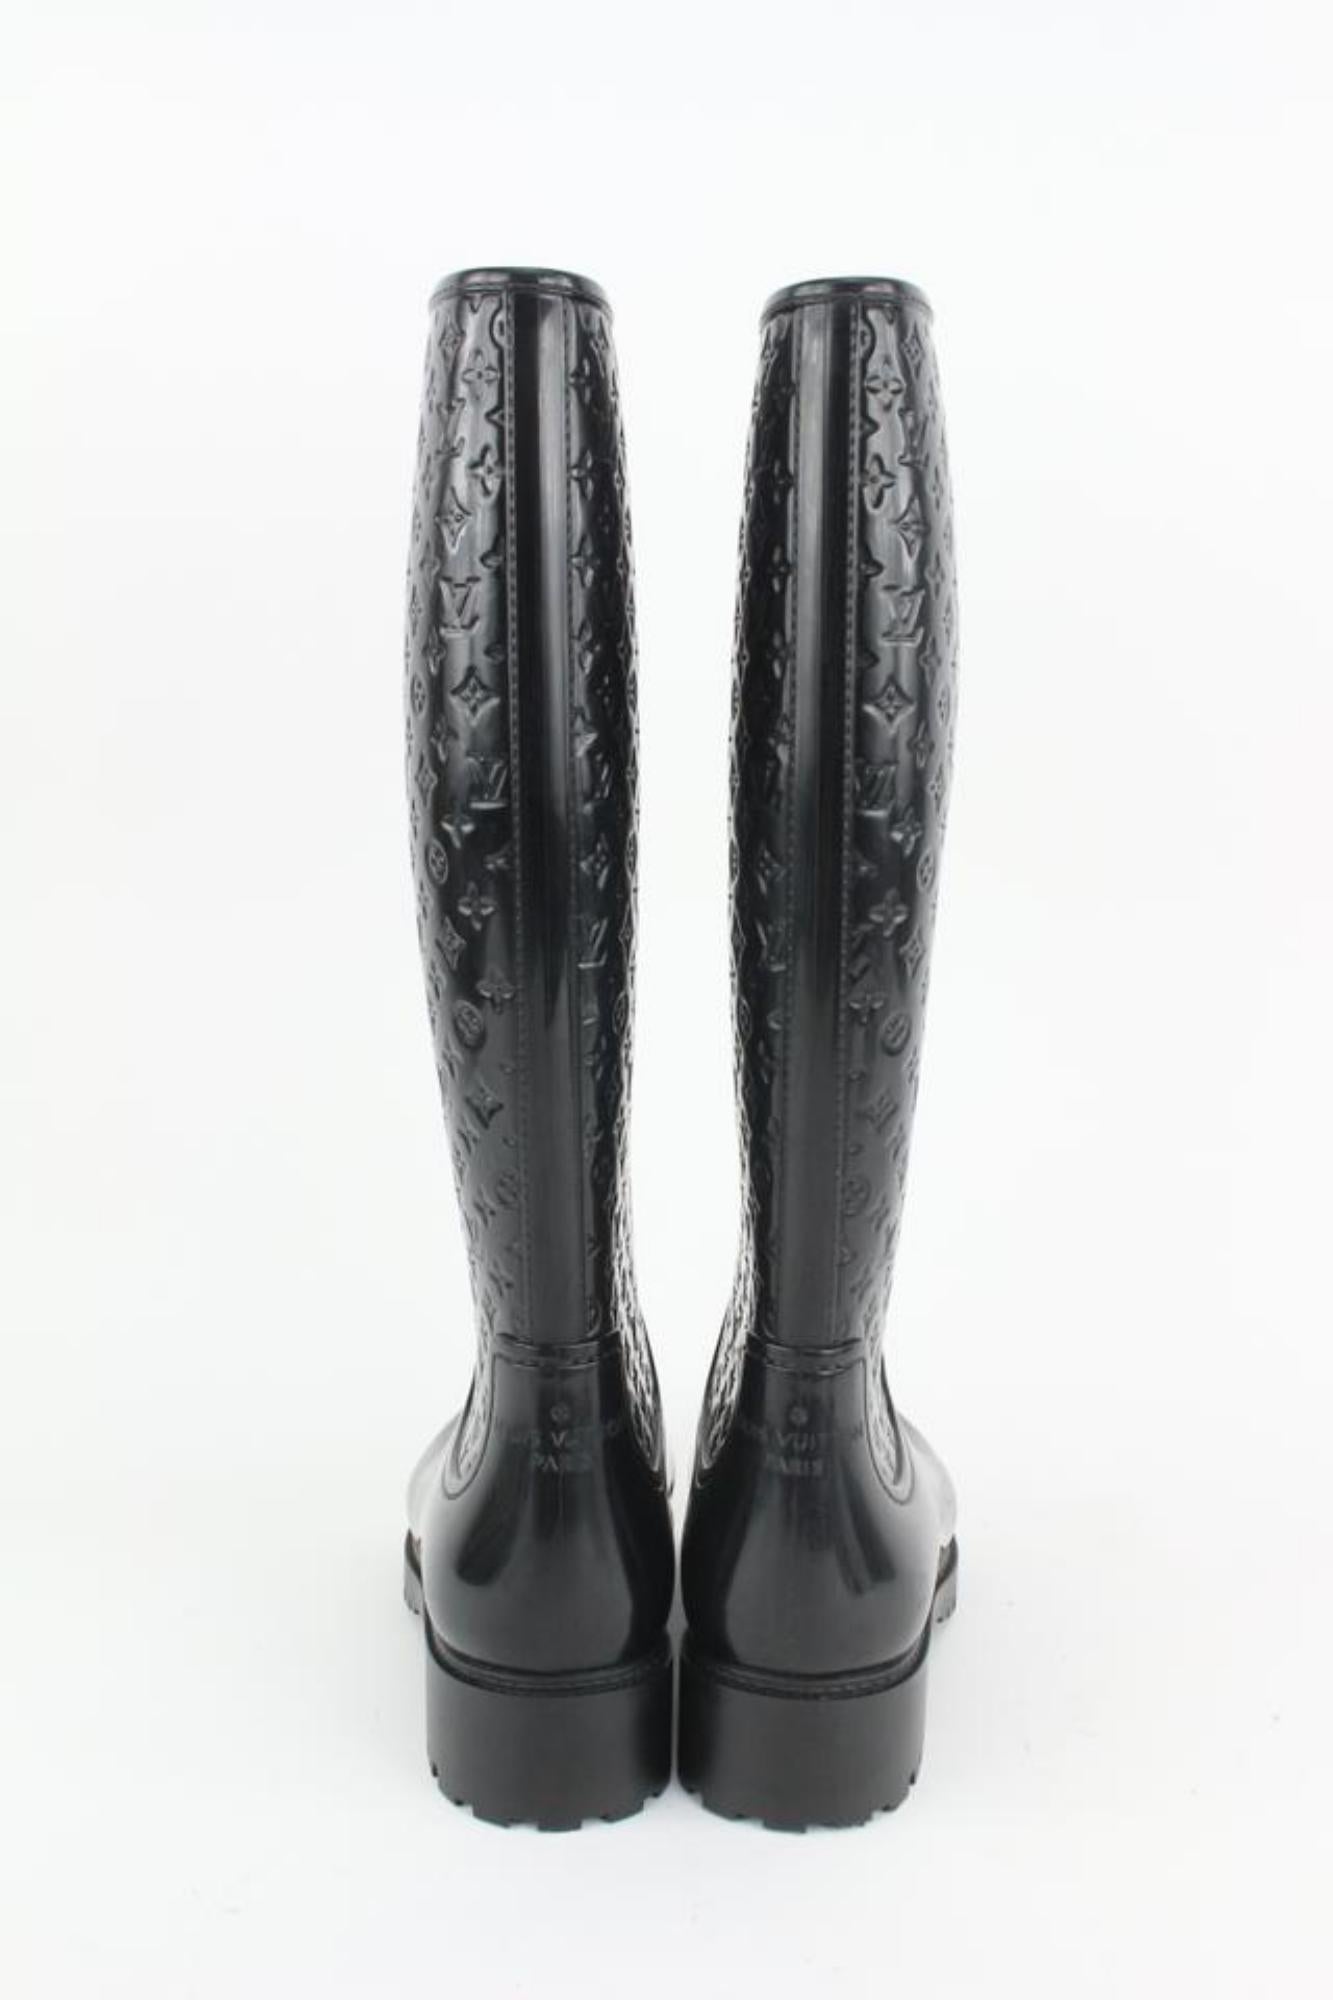 Louis Vuitton Women's 36 Black Rubber Rainboots Tall Rain Boots 9L1221 In Excellent Condition For Sale In Dix hills, NY